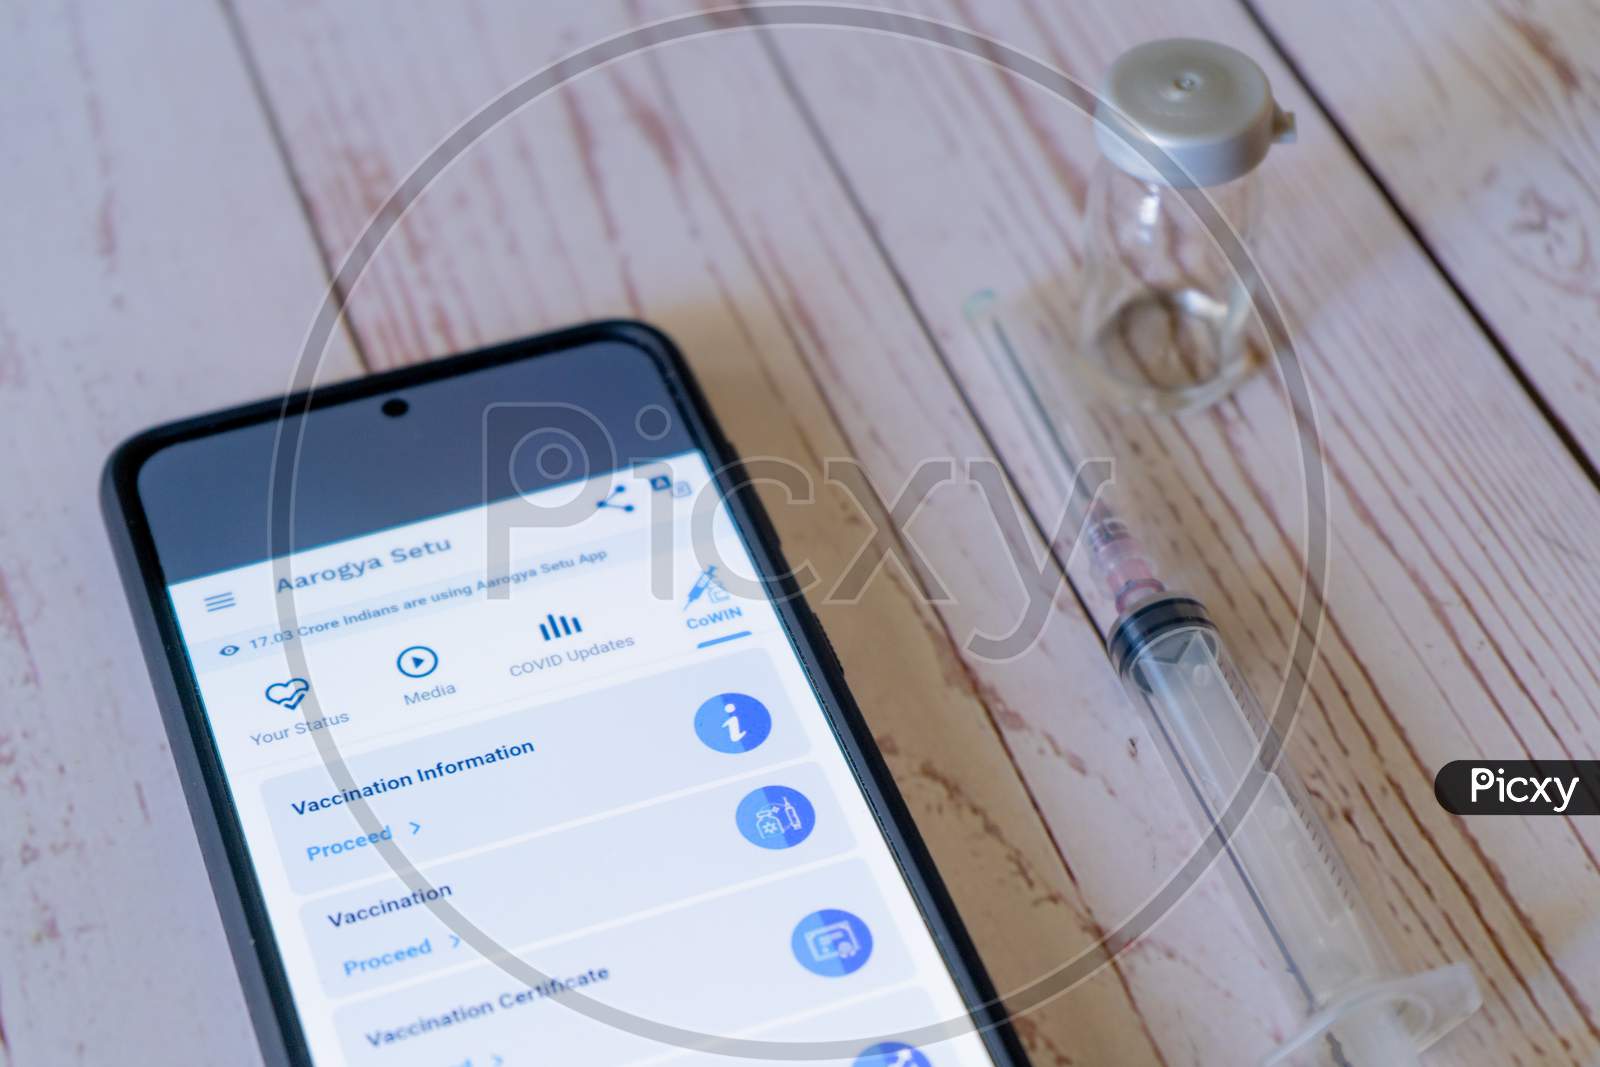 Mobile Phone With Arogya Setu Co-Win App Application Showing Vaccine Tracking Used By Patients And Doctors To Ensure Quick Distribution And Tracking During The Covid19 Coronavirus Pandemic As India Struggles With Lockdowns